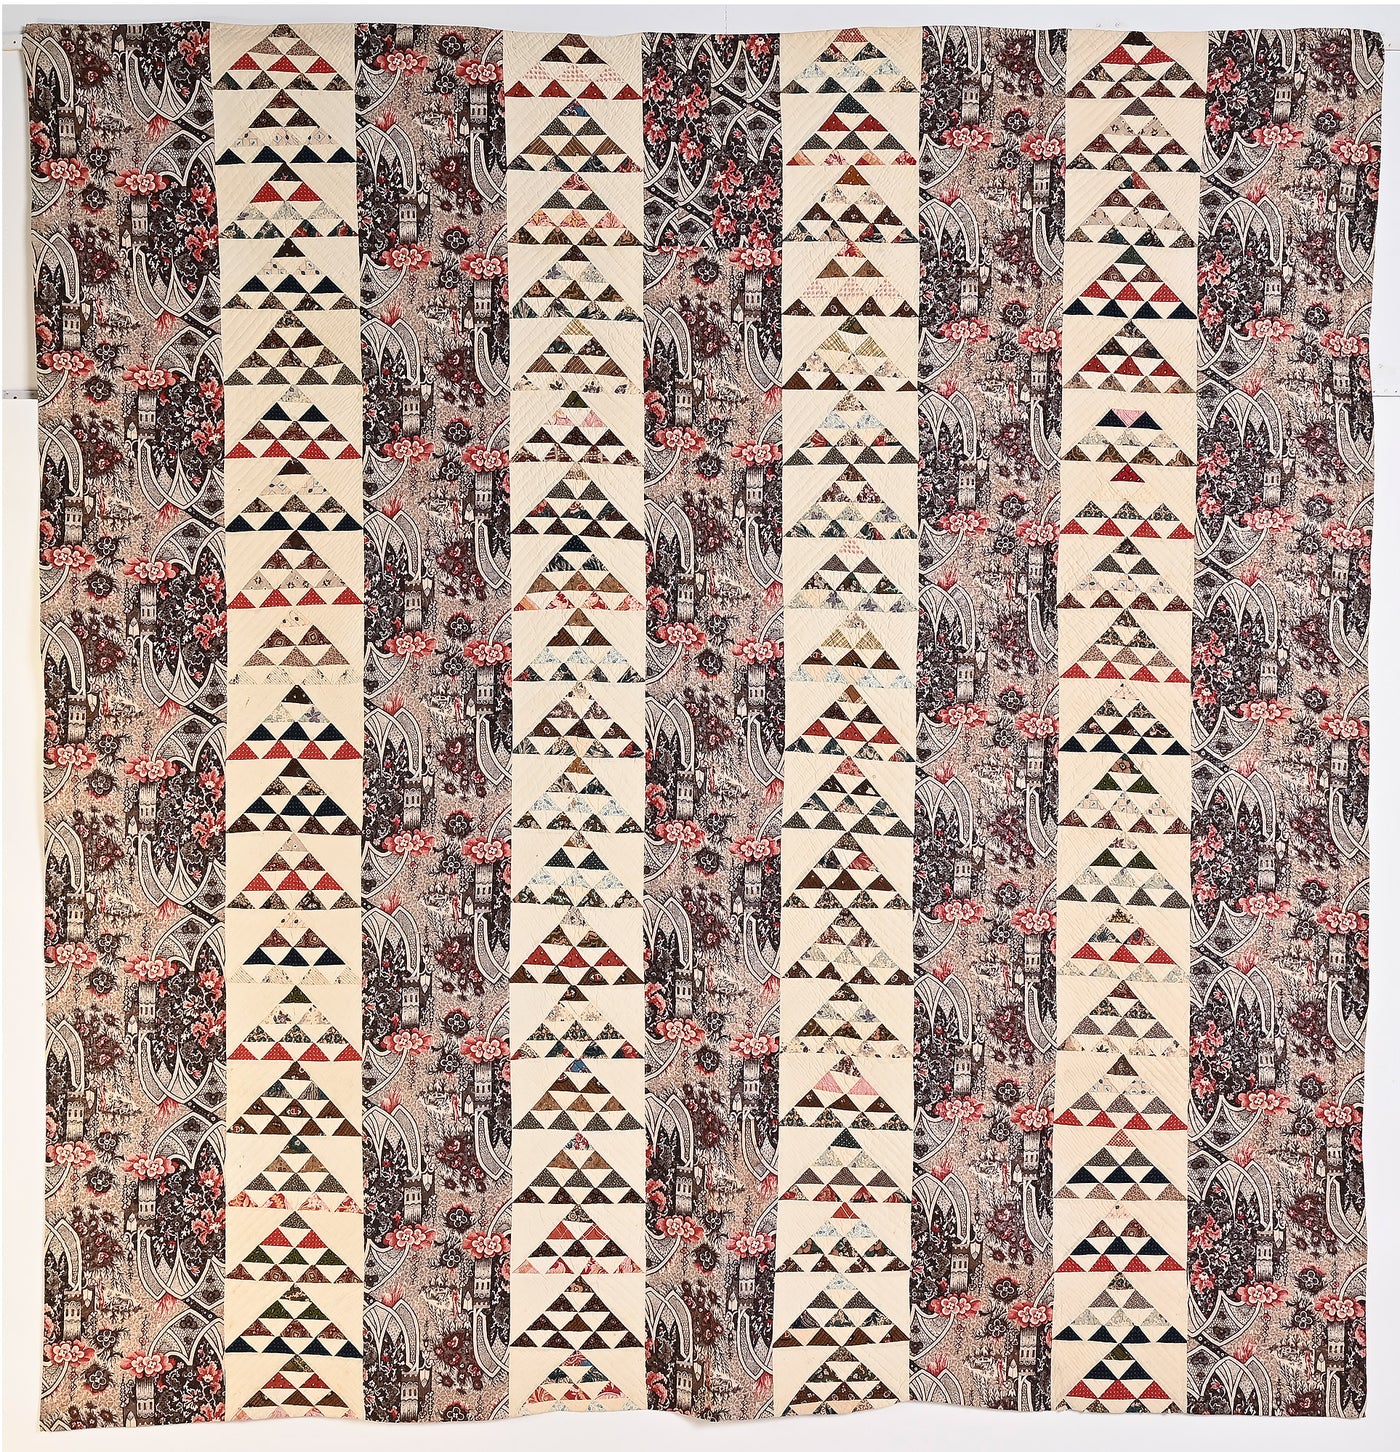 flying-geese-quilt-circa-1840-1451647